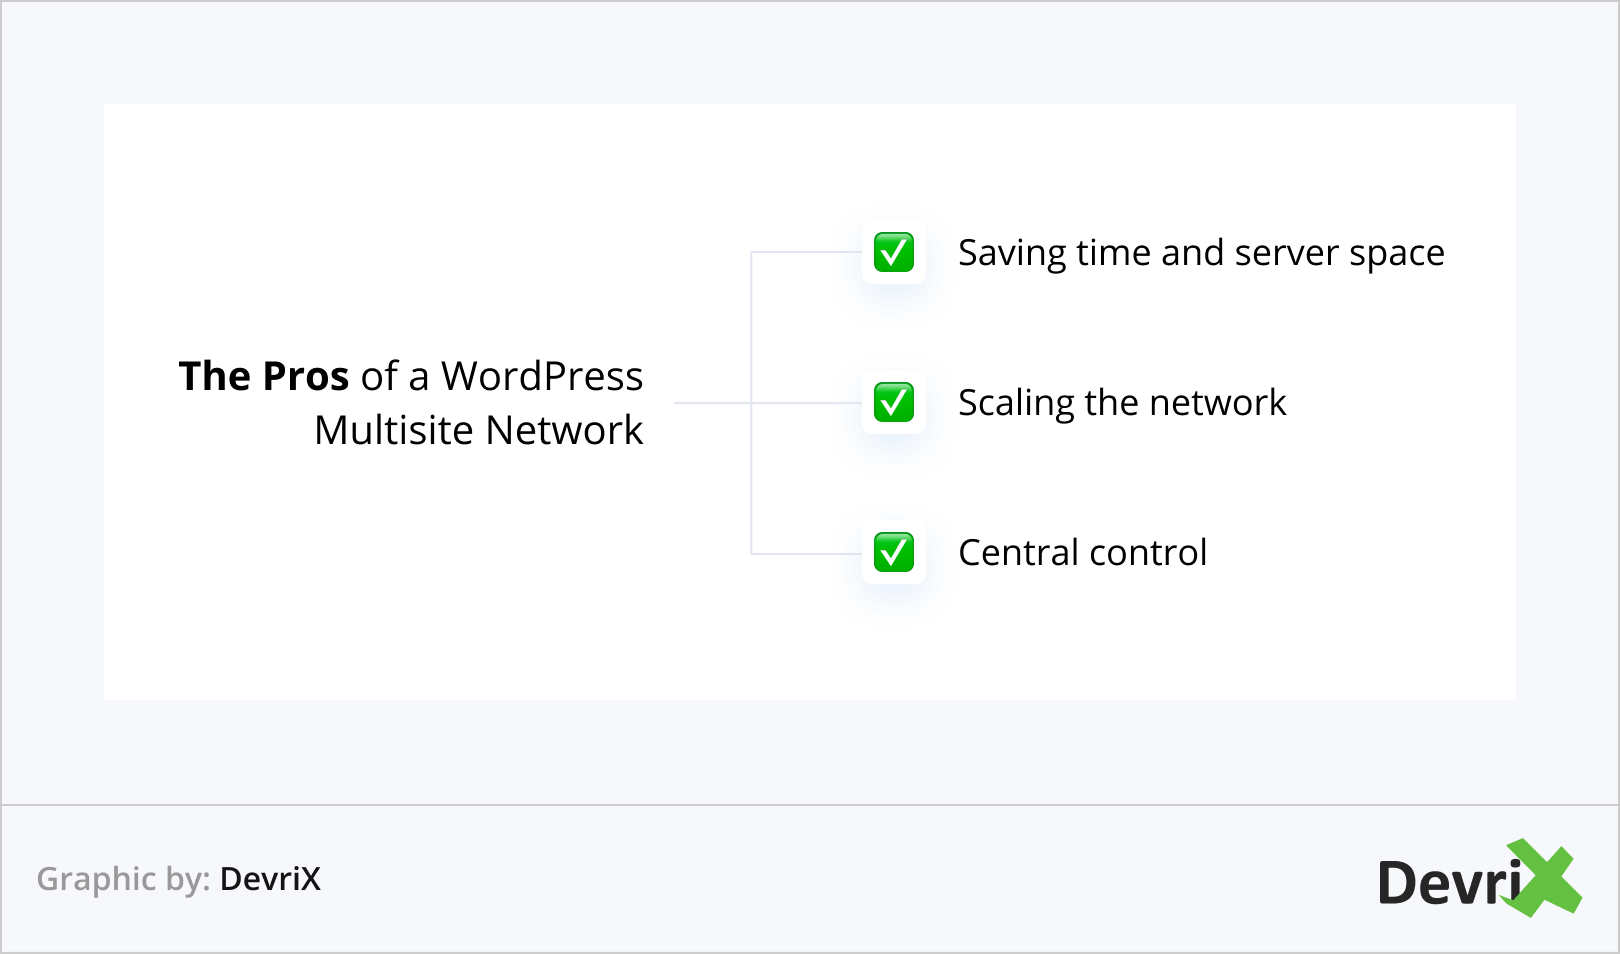 The Pros of a WordPress Multisite Network